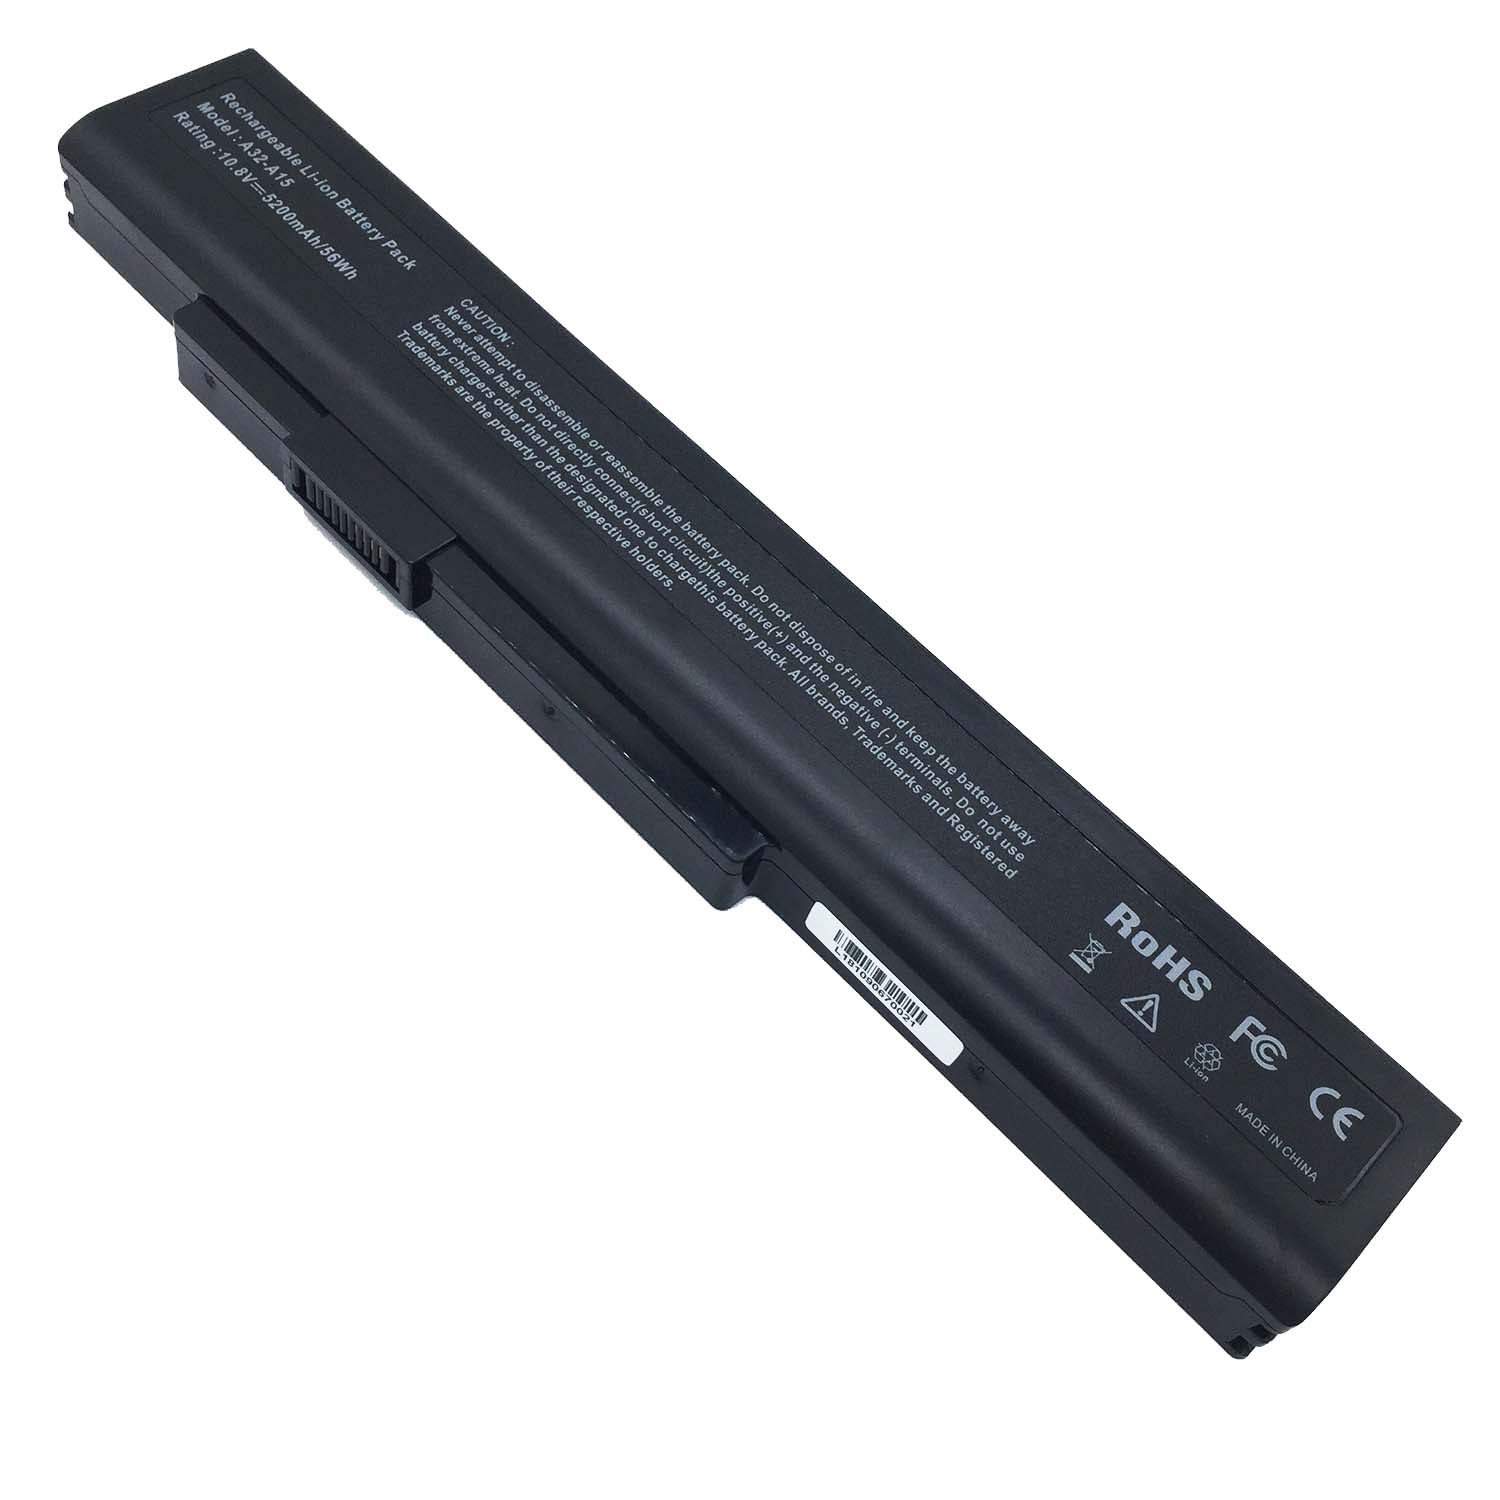 Replacement Battery for Medion Medion Akoya E6221 battery